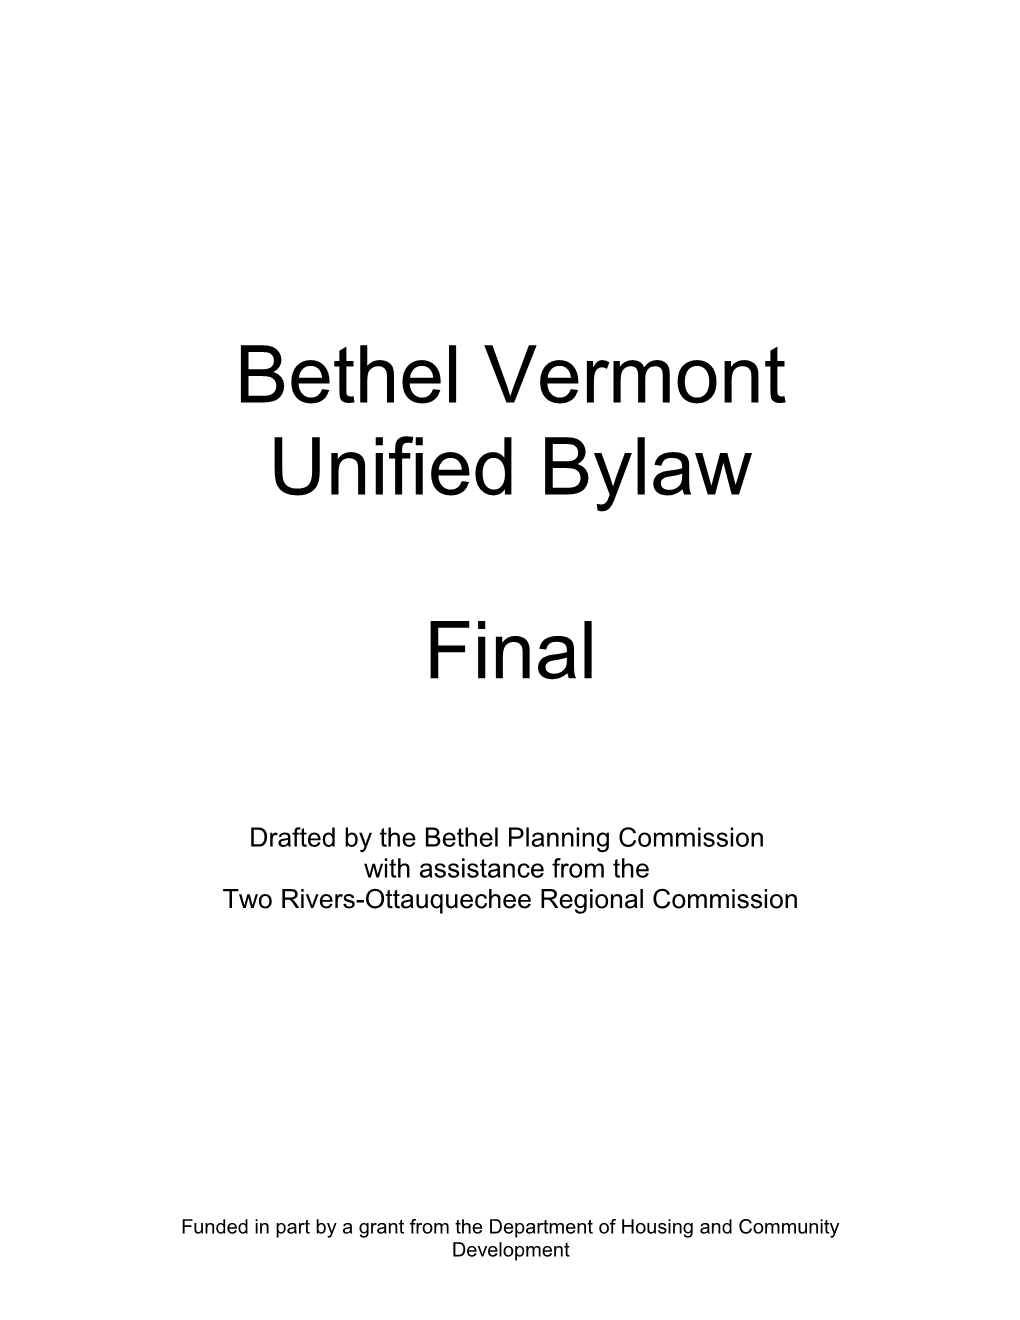 Drafted by the Bethel Planning Commission